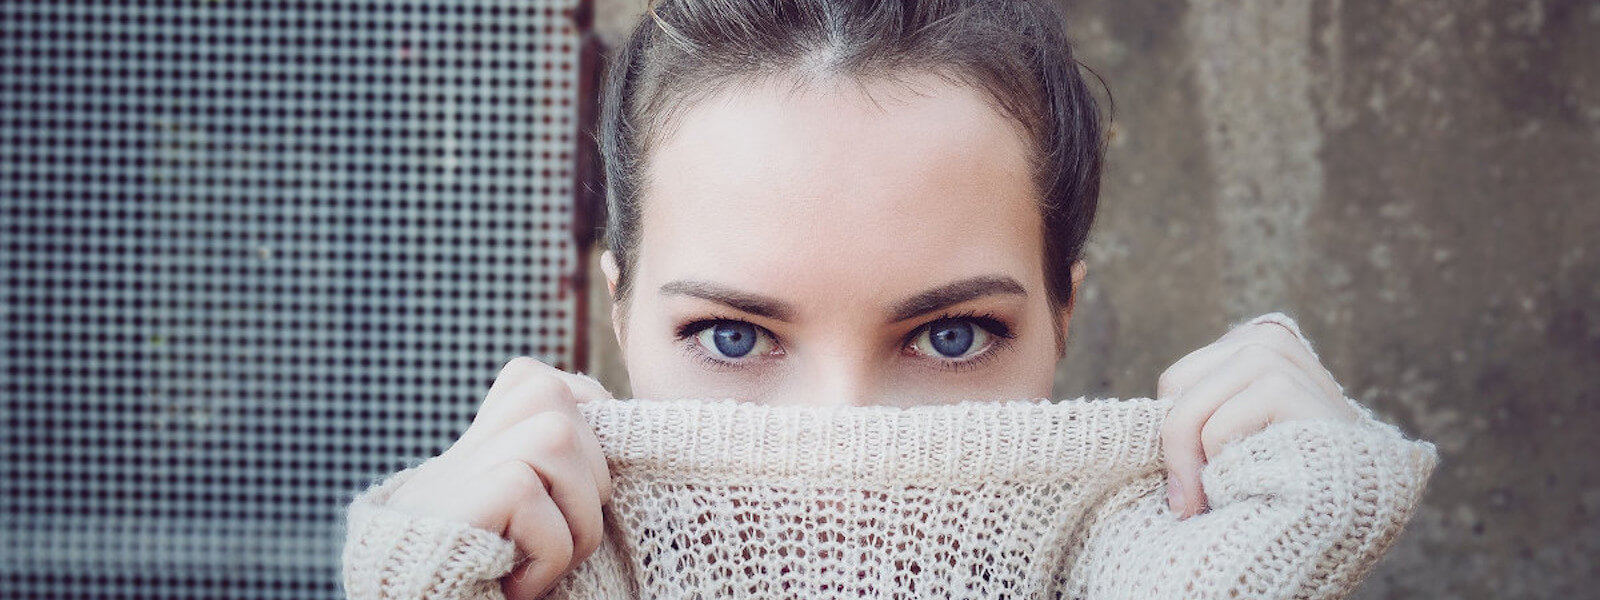 Young woman hiding part of her face behind a white turtleneck sweater.